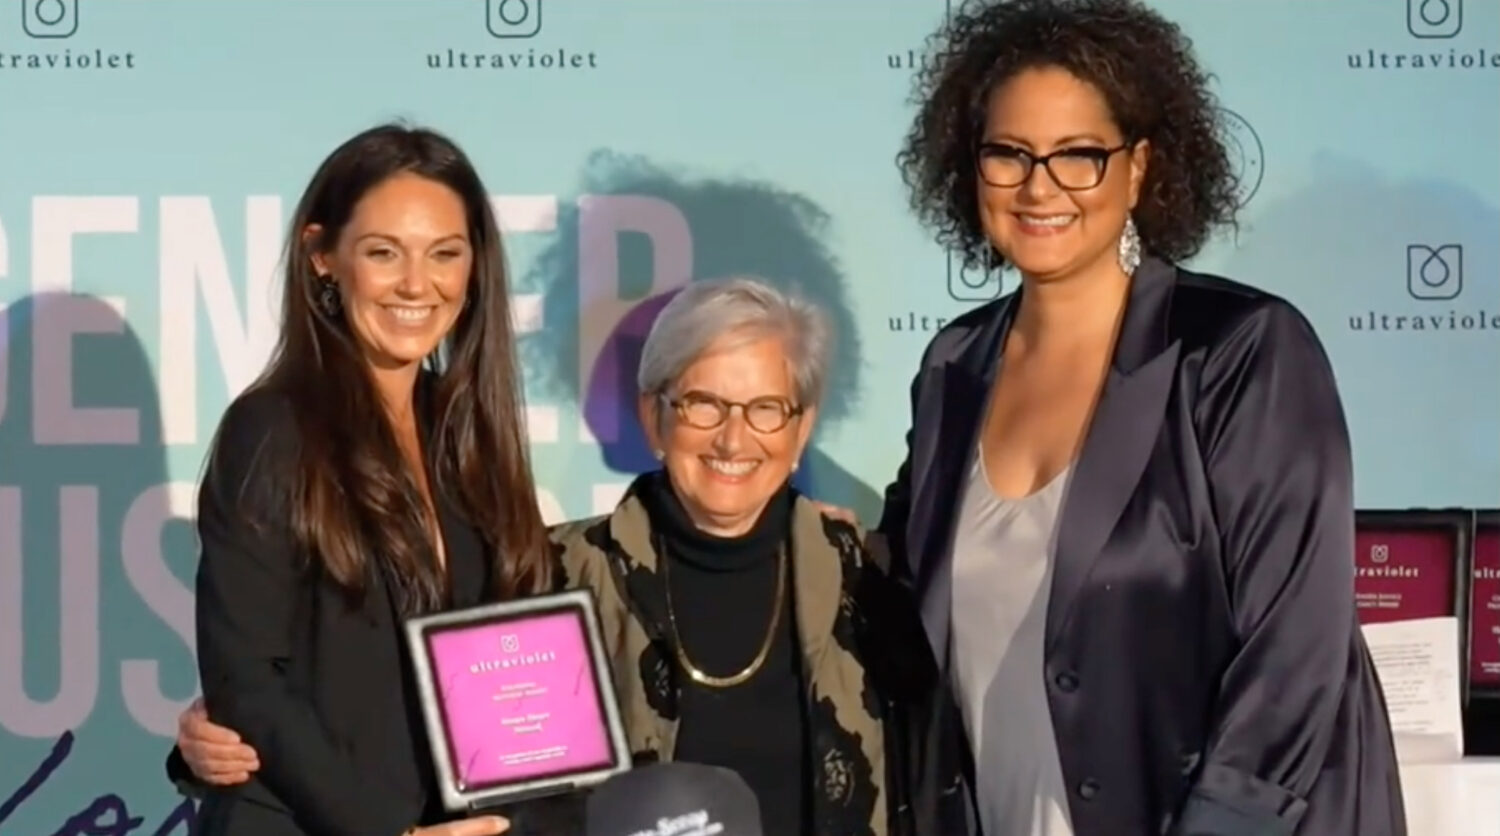 From left to right: Shaunna Thomas, UltraViolet Co-Founder & Executive Director; Donna P. Hall, WDN President & CEO Emerita; Karen Finney, UltraViolet Education Fund Board Chair